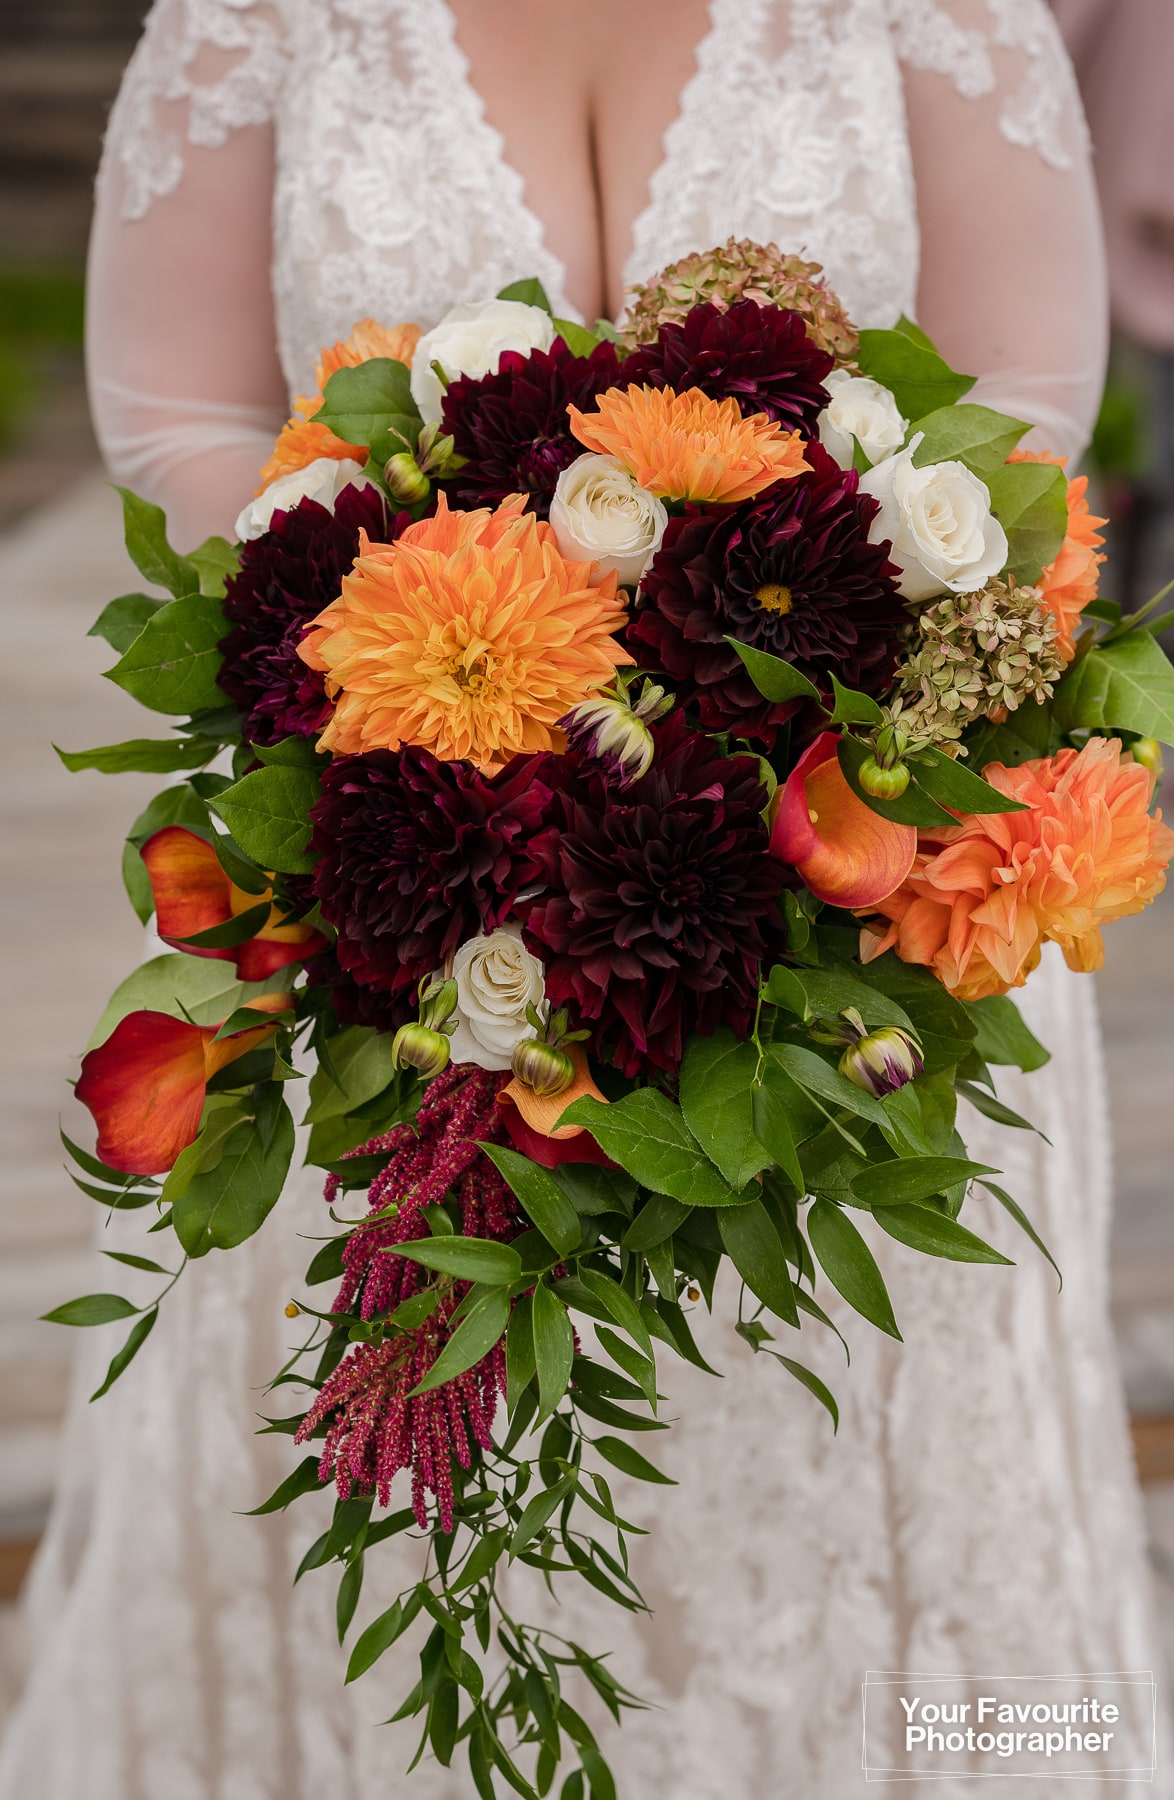 Beautiful floral bouquet for wedding